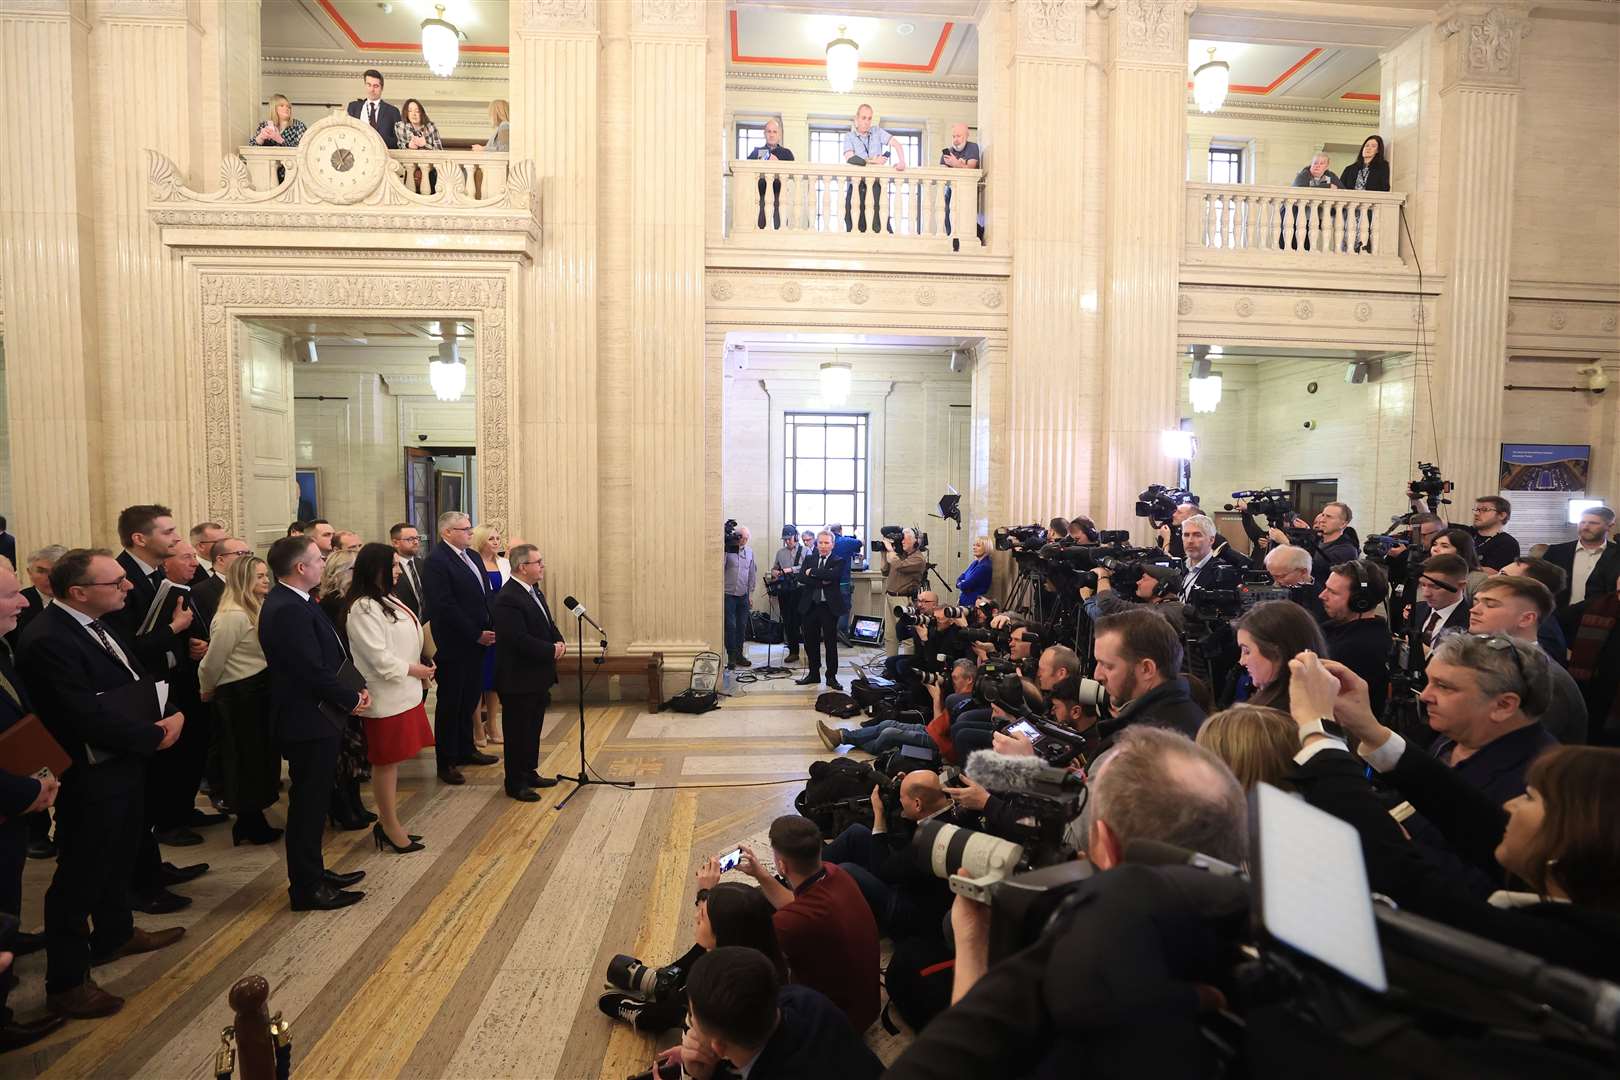 The media scrum in the Great Hall (Oliver McVeigh/PA)